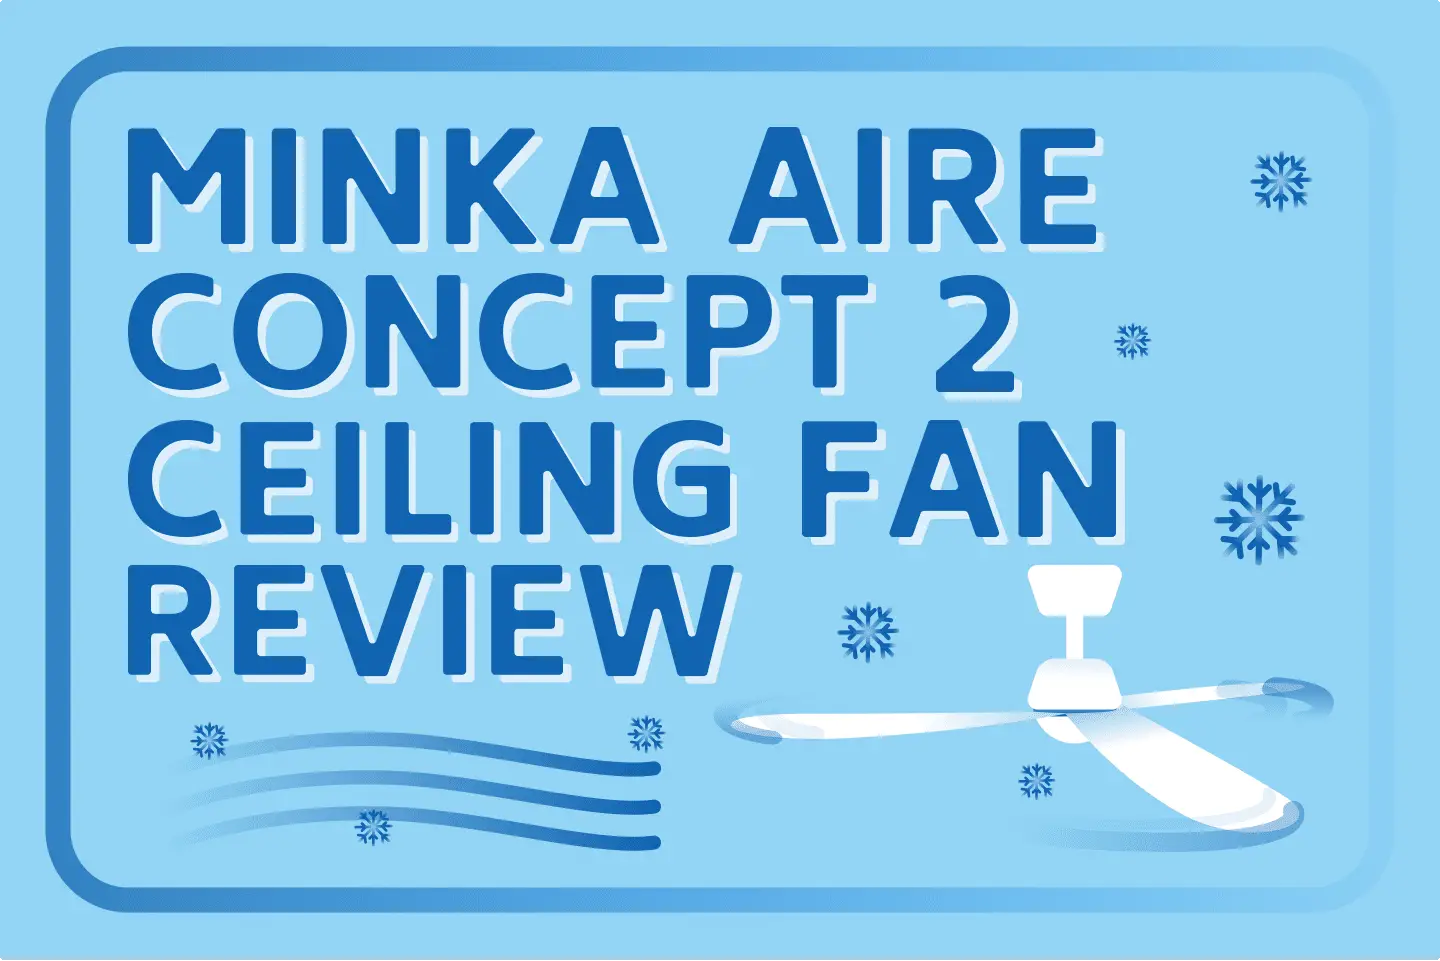 Minka Aire Concept II Ceiling Fan Review